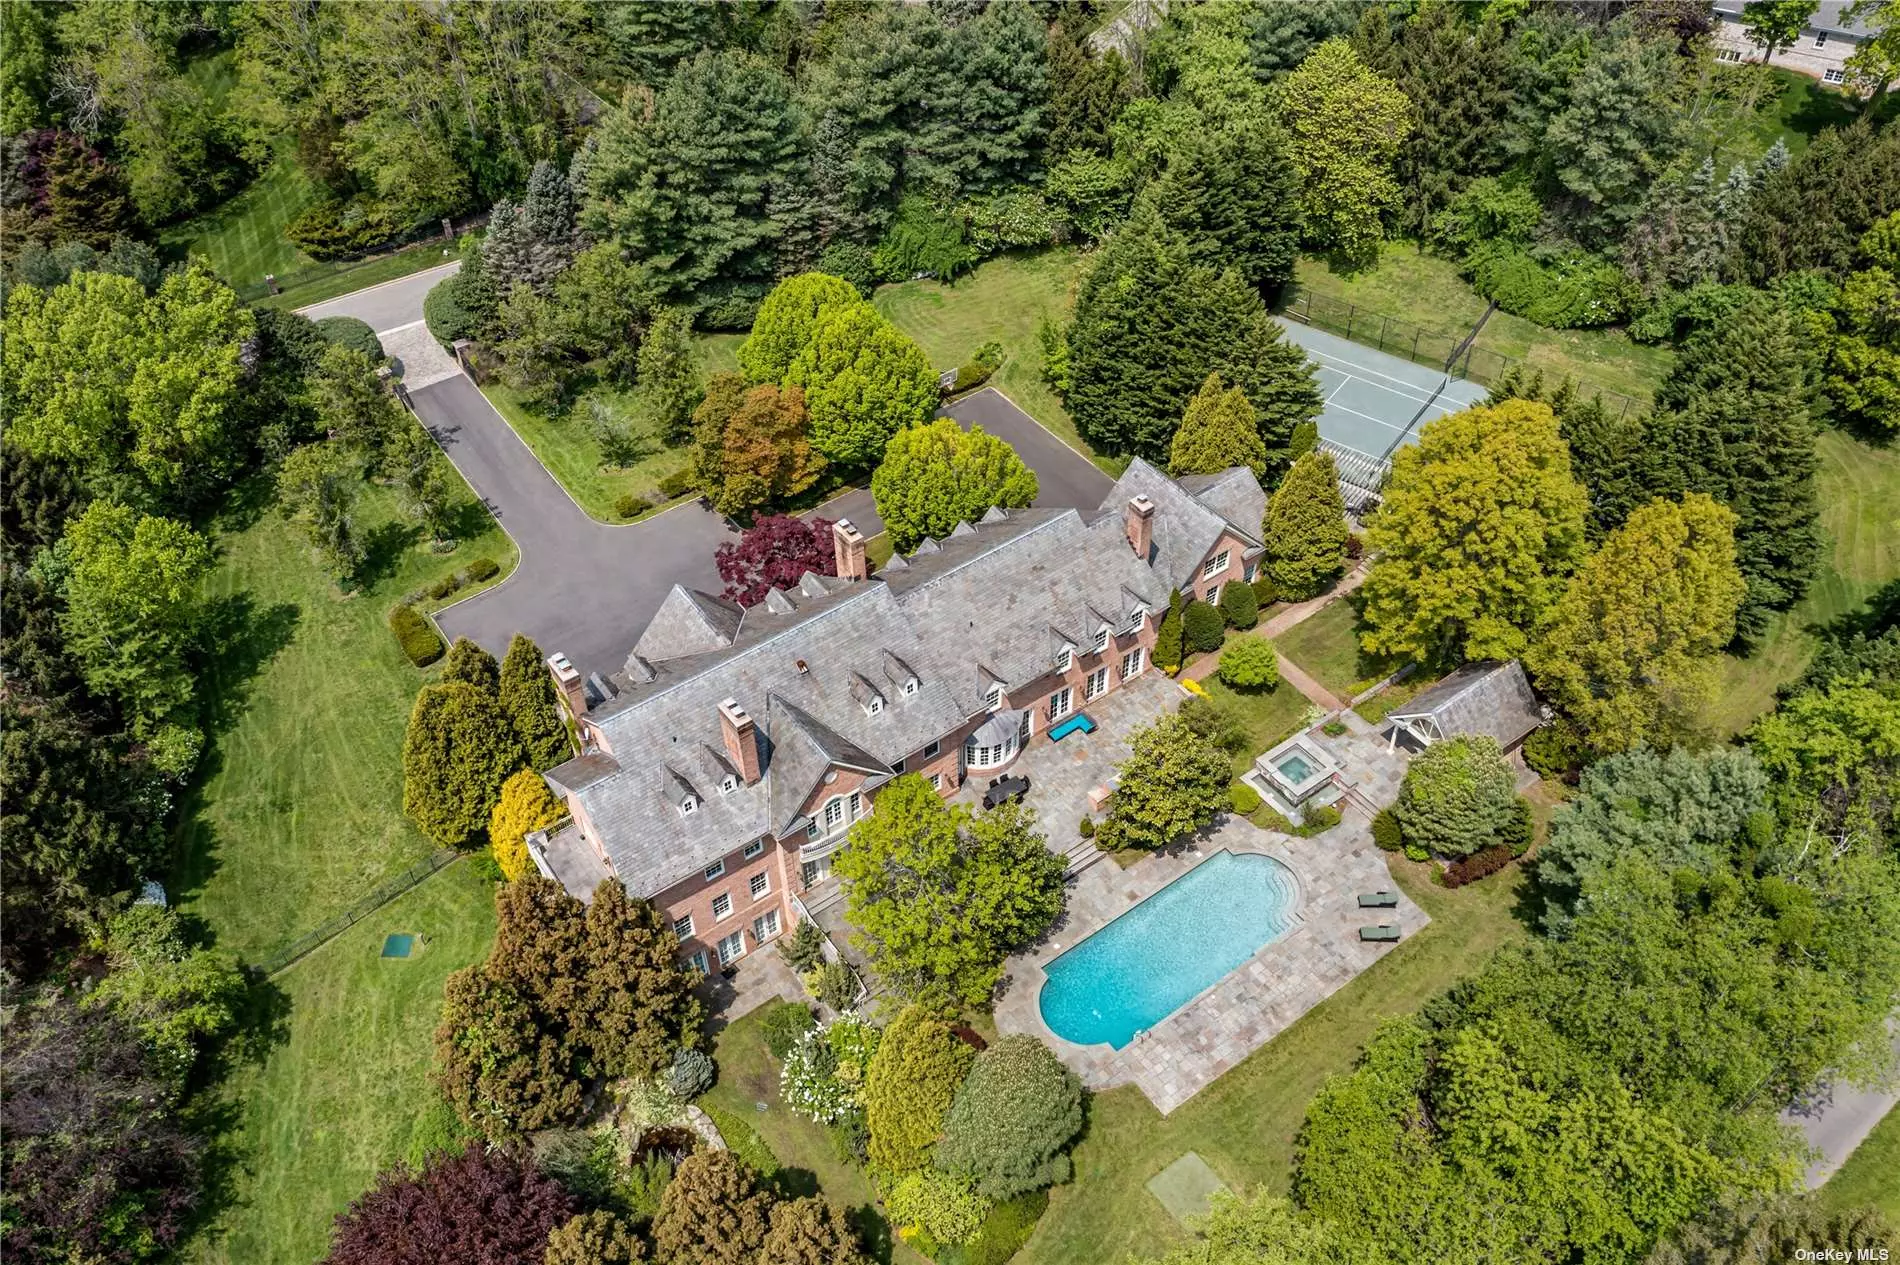 A 10, 000+ Sq.Ft. Brick Estate, located in the Heart of Old Westbury, NY. This magnificent, iron-gated 8 Bedroom, 13 Bathroom home sits tall on 5.25 rolling acres, with an in-ground pool, tennis court and putting green. Interior details include custom Millwork, oversized entertaining rooms, soaring ceilings, a 3-car attached garage and a spacious walk-out basement with a Media Room/ Theatre, Fitness Center, Billiards Room and Wine Cellar. Within the sought-after Jericho Union Free School District.